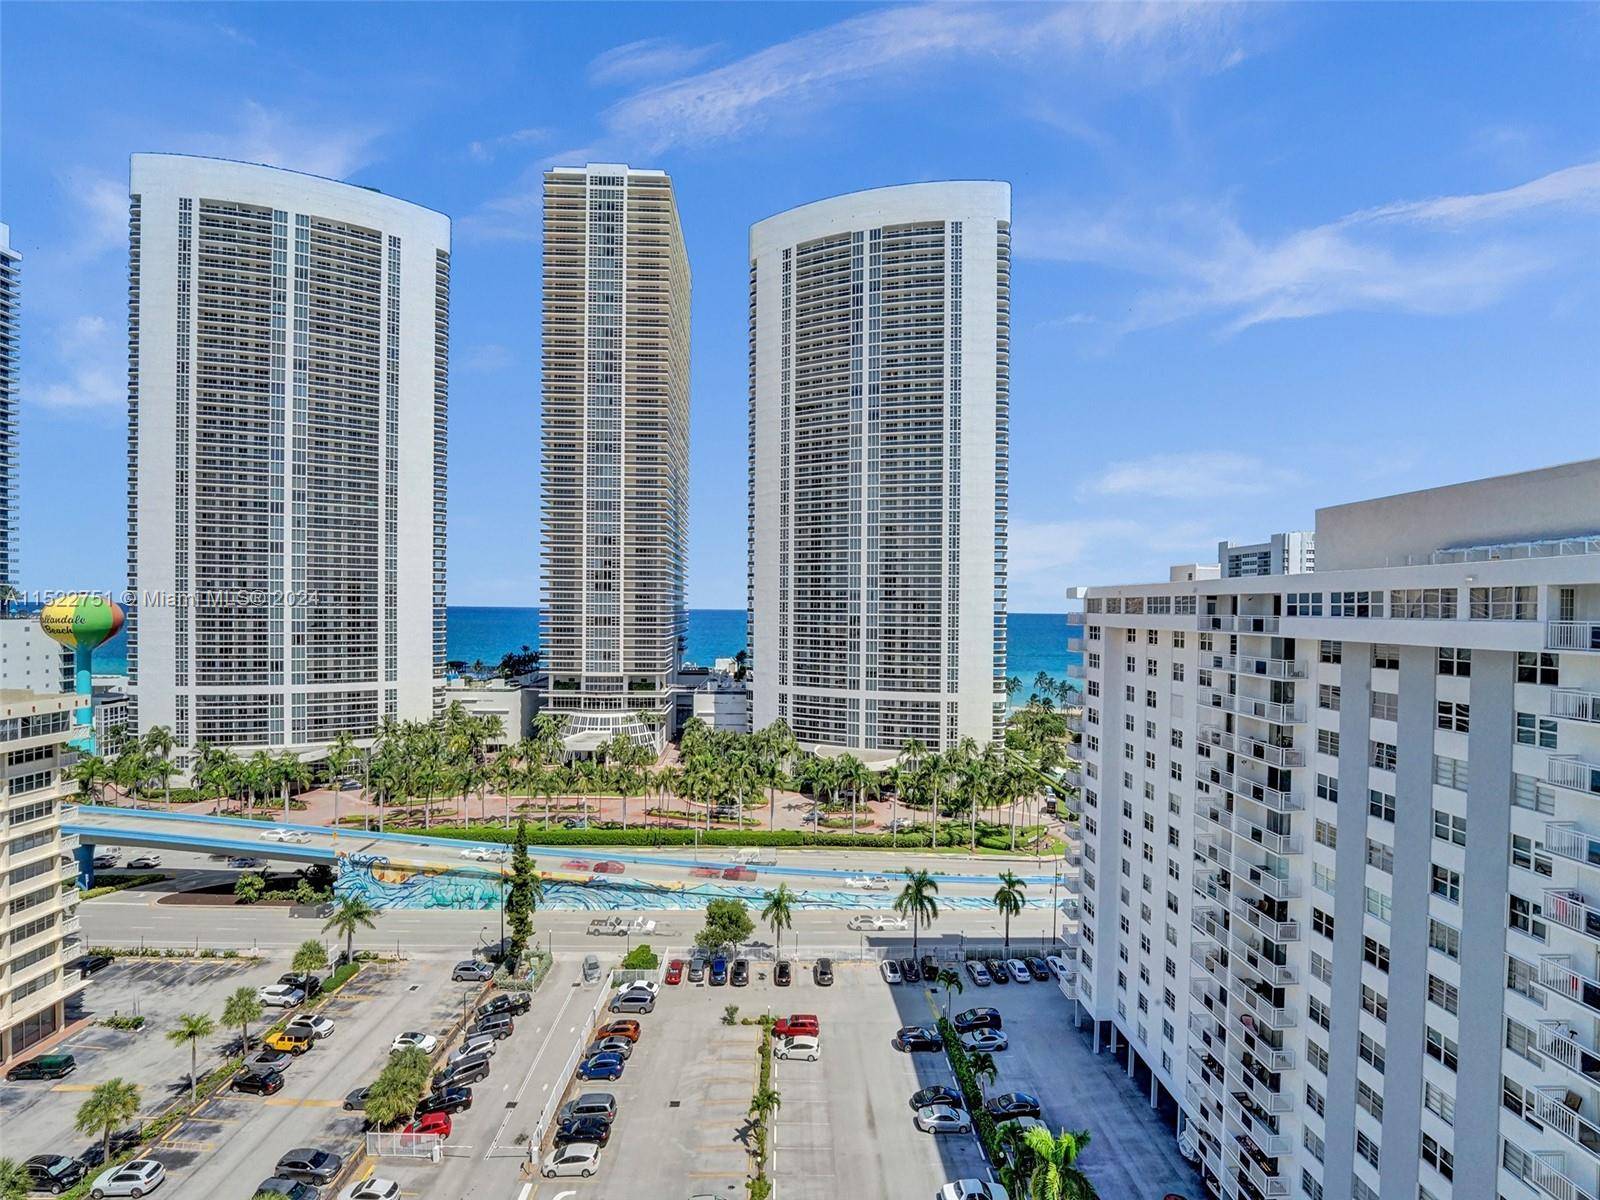 RARELY AVAILABLE 17TH FLOOR CORNER IMPECCABLE CONDO LARGEST FLOORPLAN WITH MILLION DOLLAR INTRACOASTAL AND OCEAN VIEWS IS A MUST SEE !